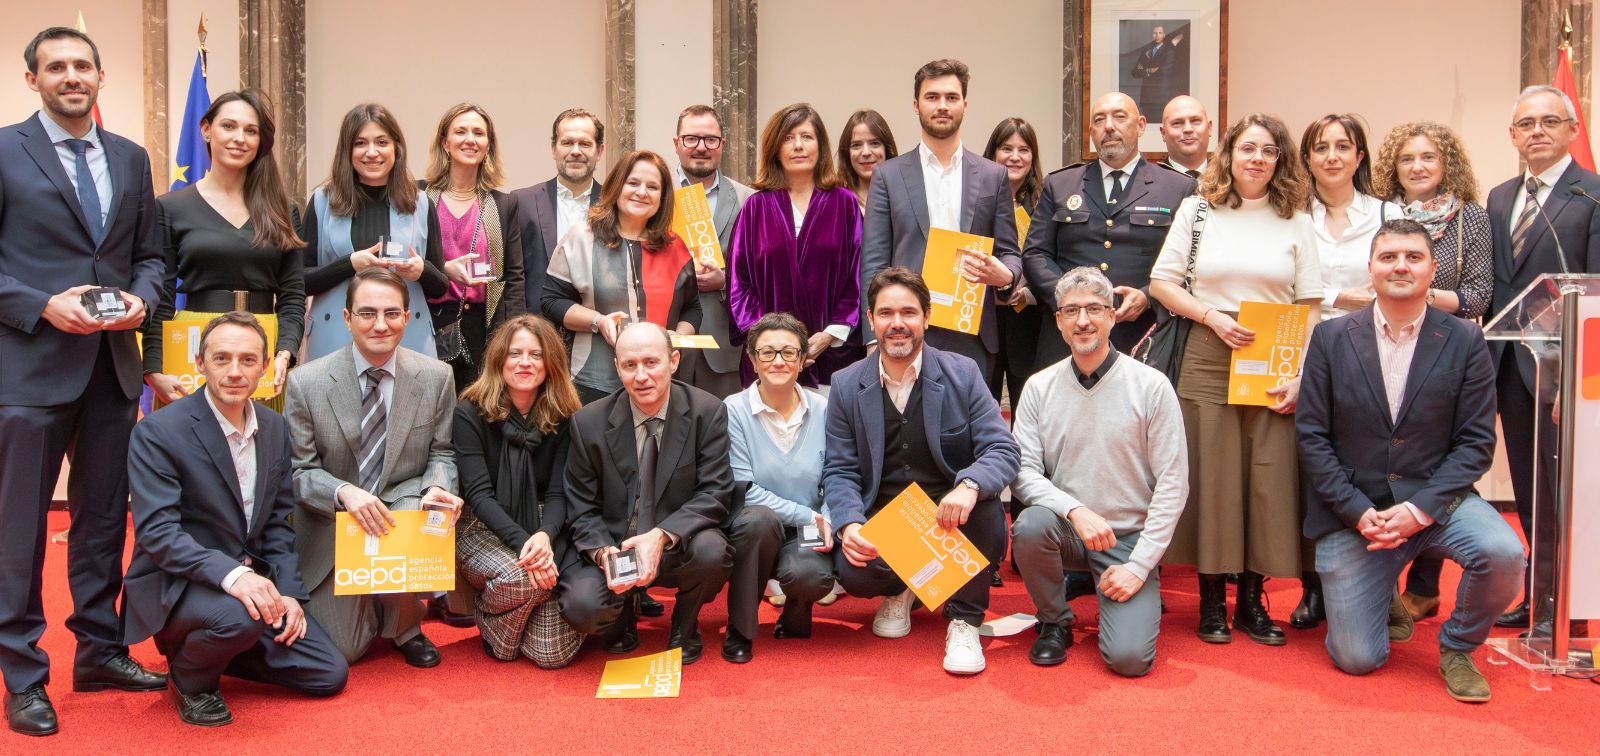 People and representatives of the entities awarded in the 'Data Protection Awards 2023', including ISGlobal (Photo: Spanish Data Protection Agency).